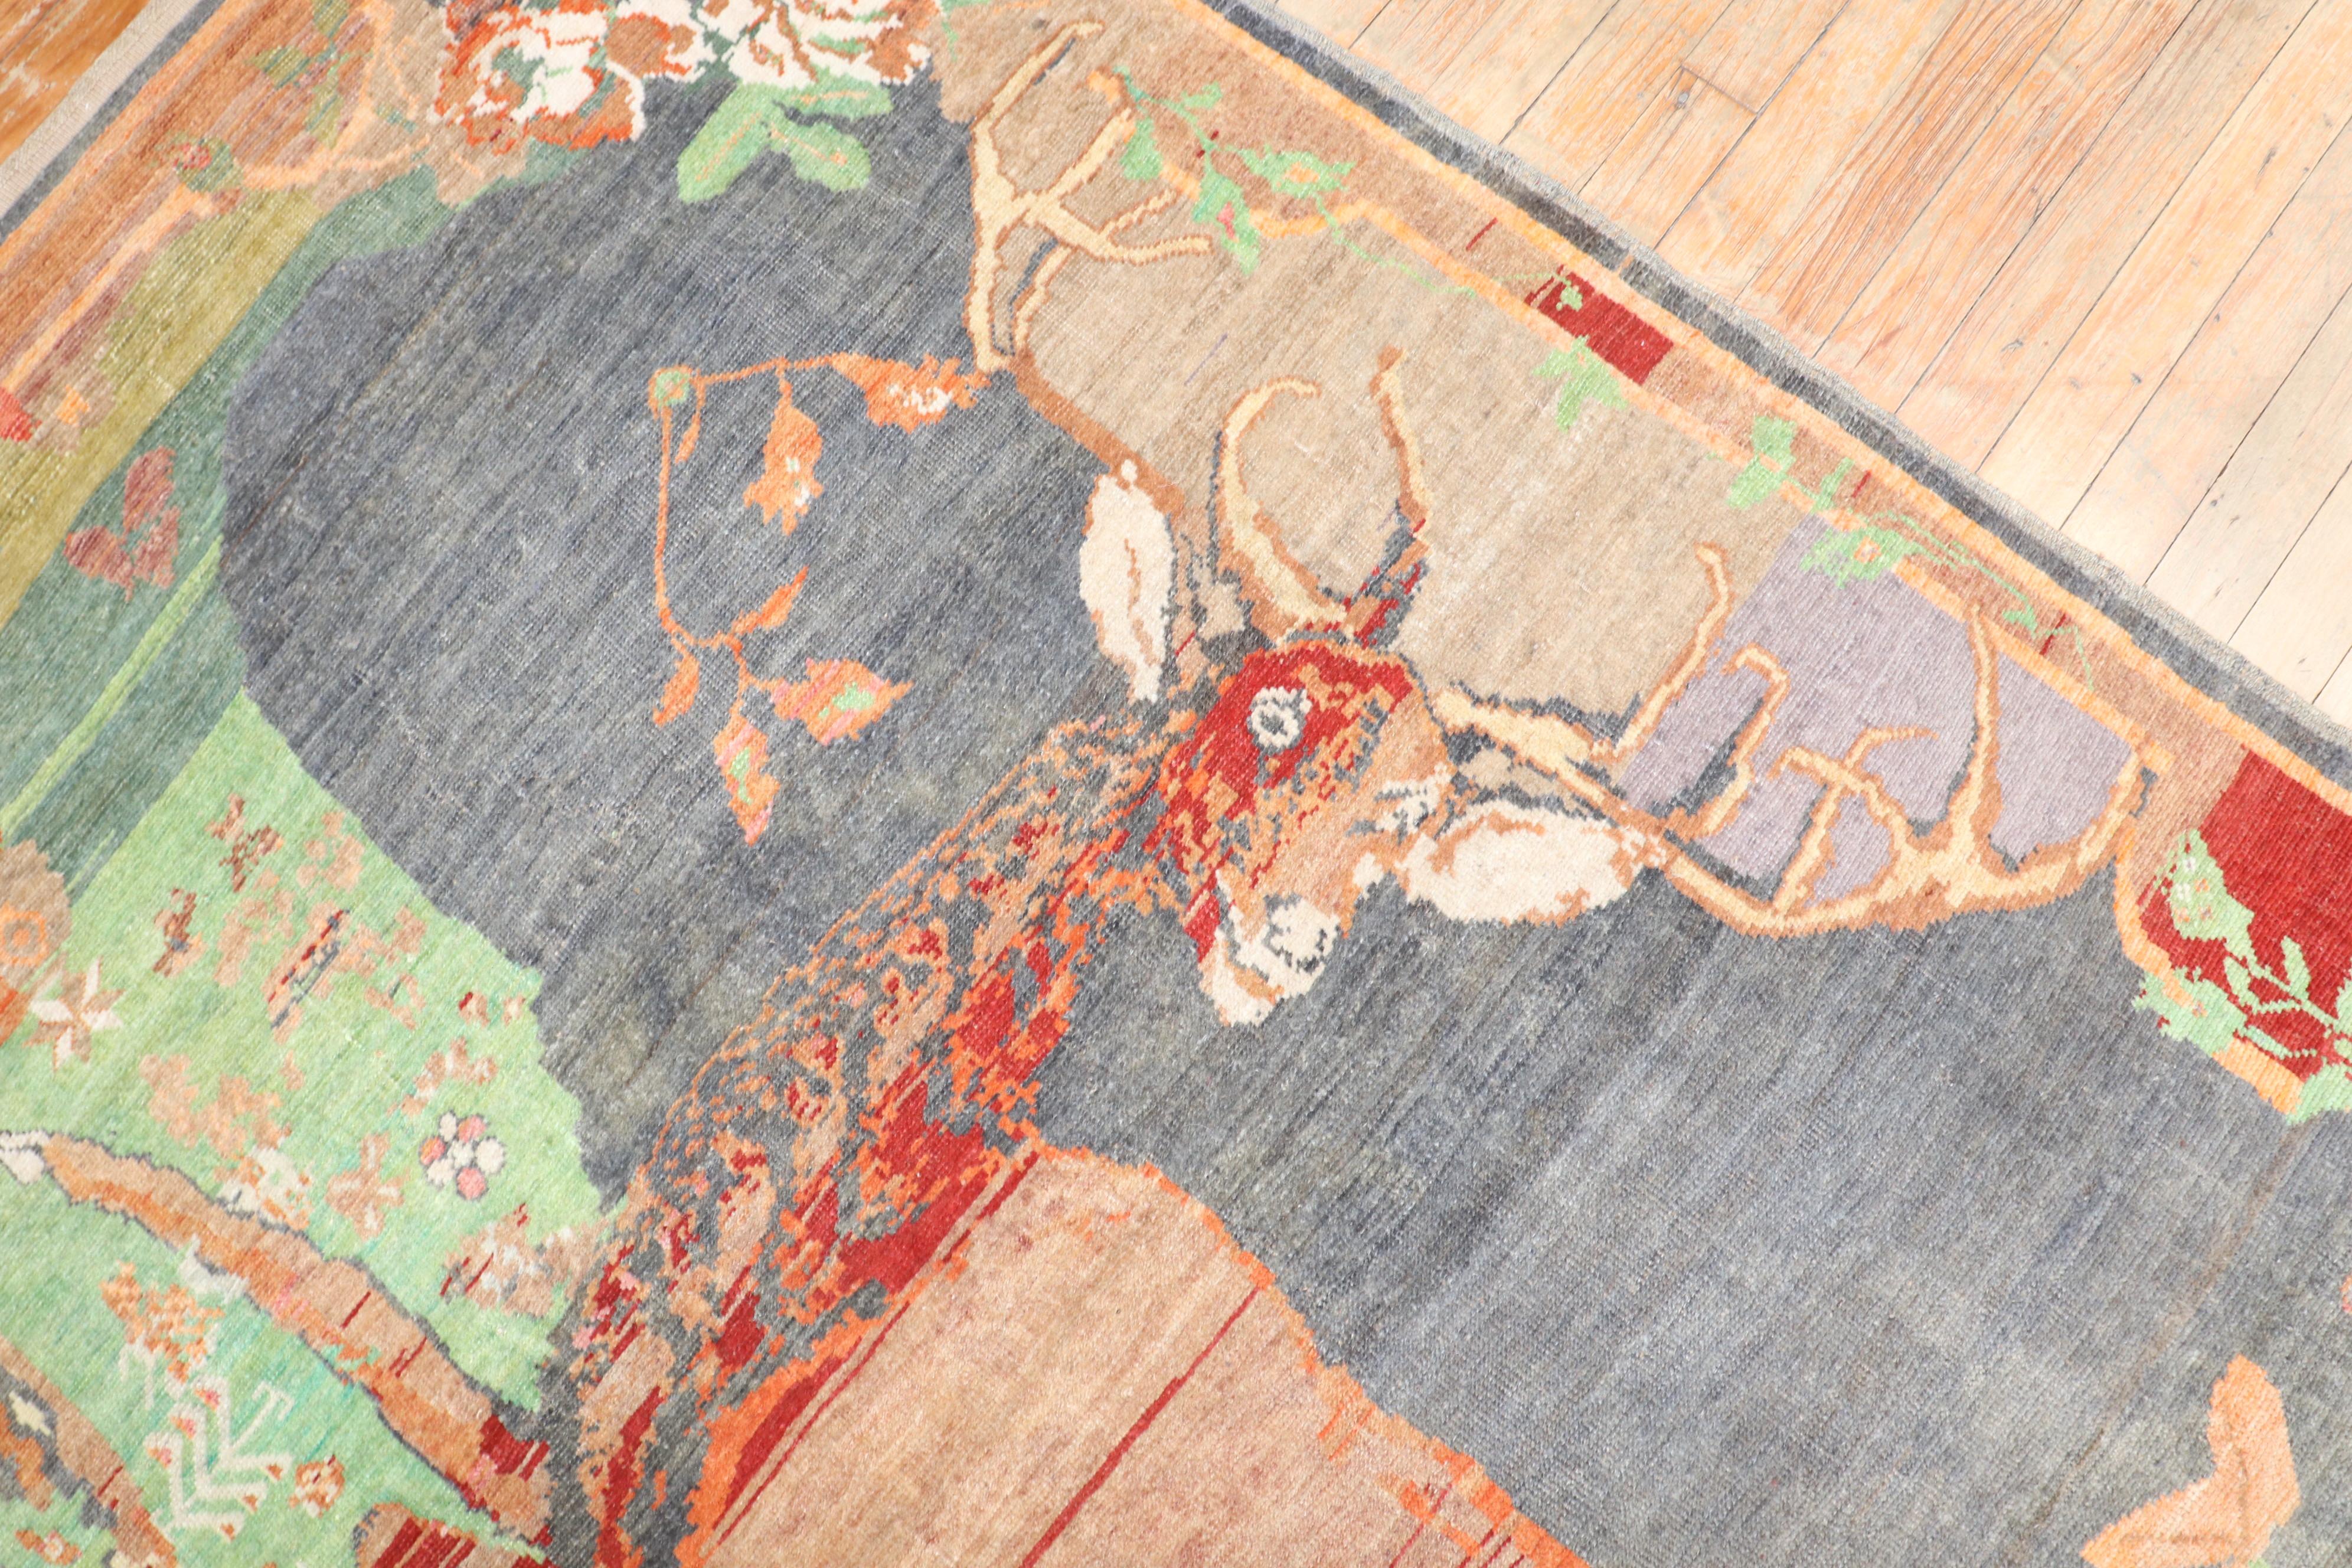 Jolly Deer Pictorial Karabagh Conversation Rug In Good Condition For Sale In New York, NY